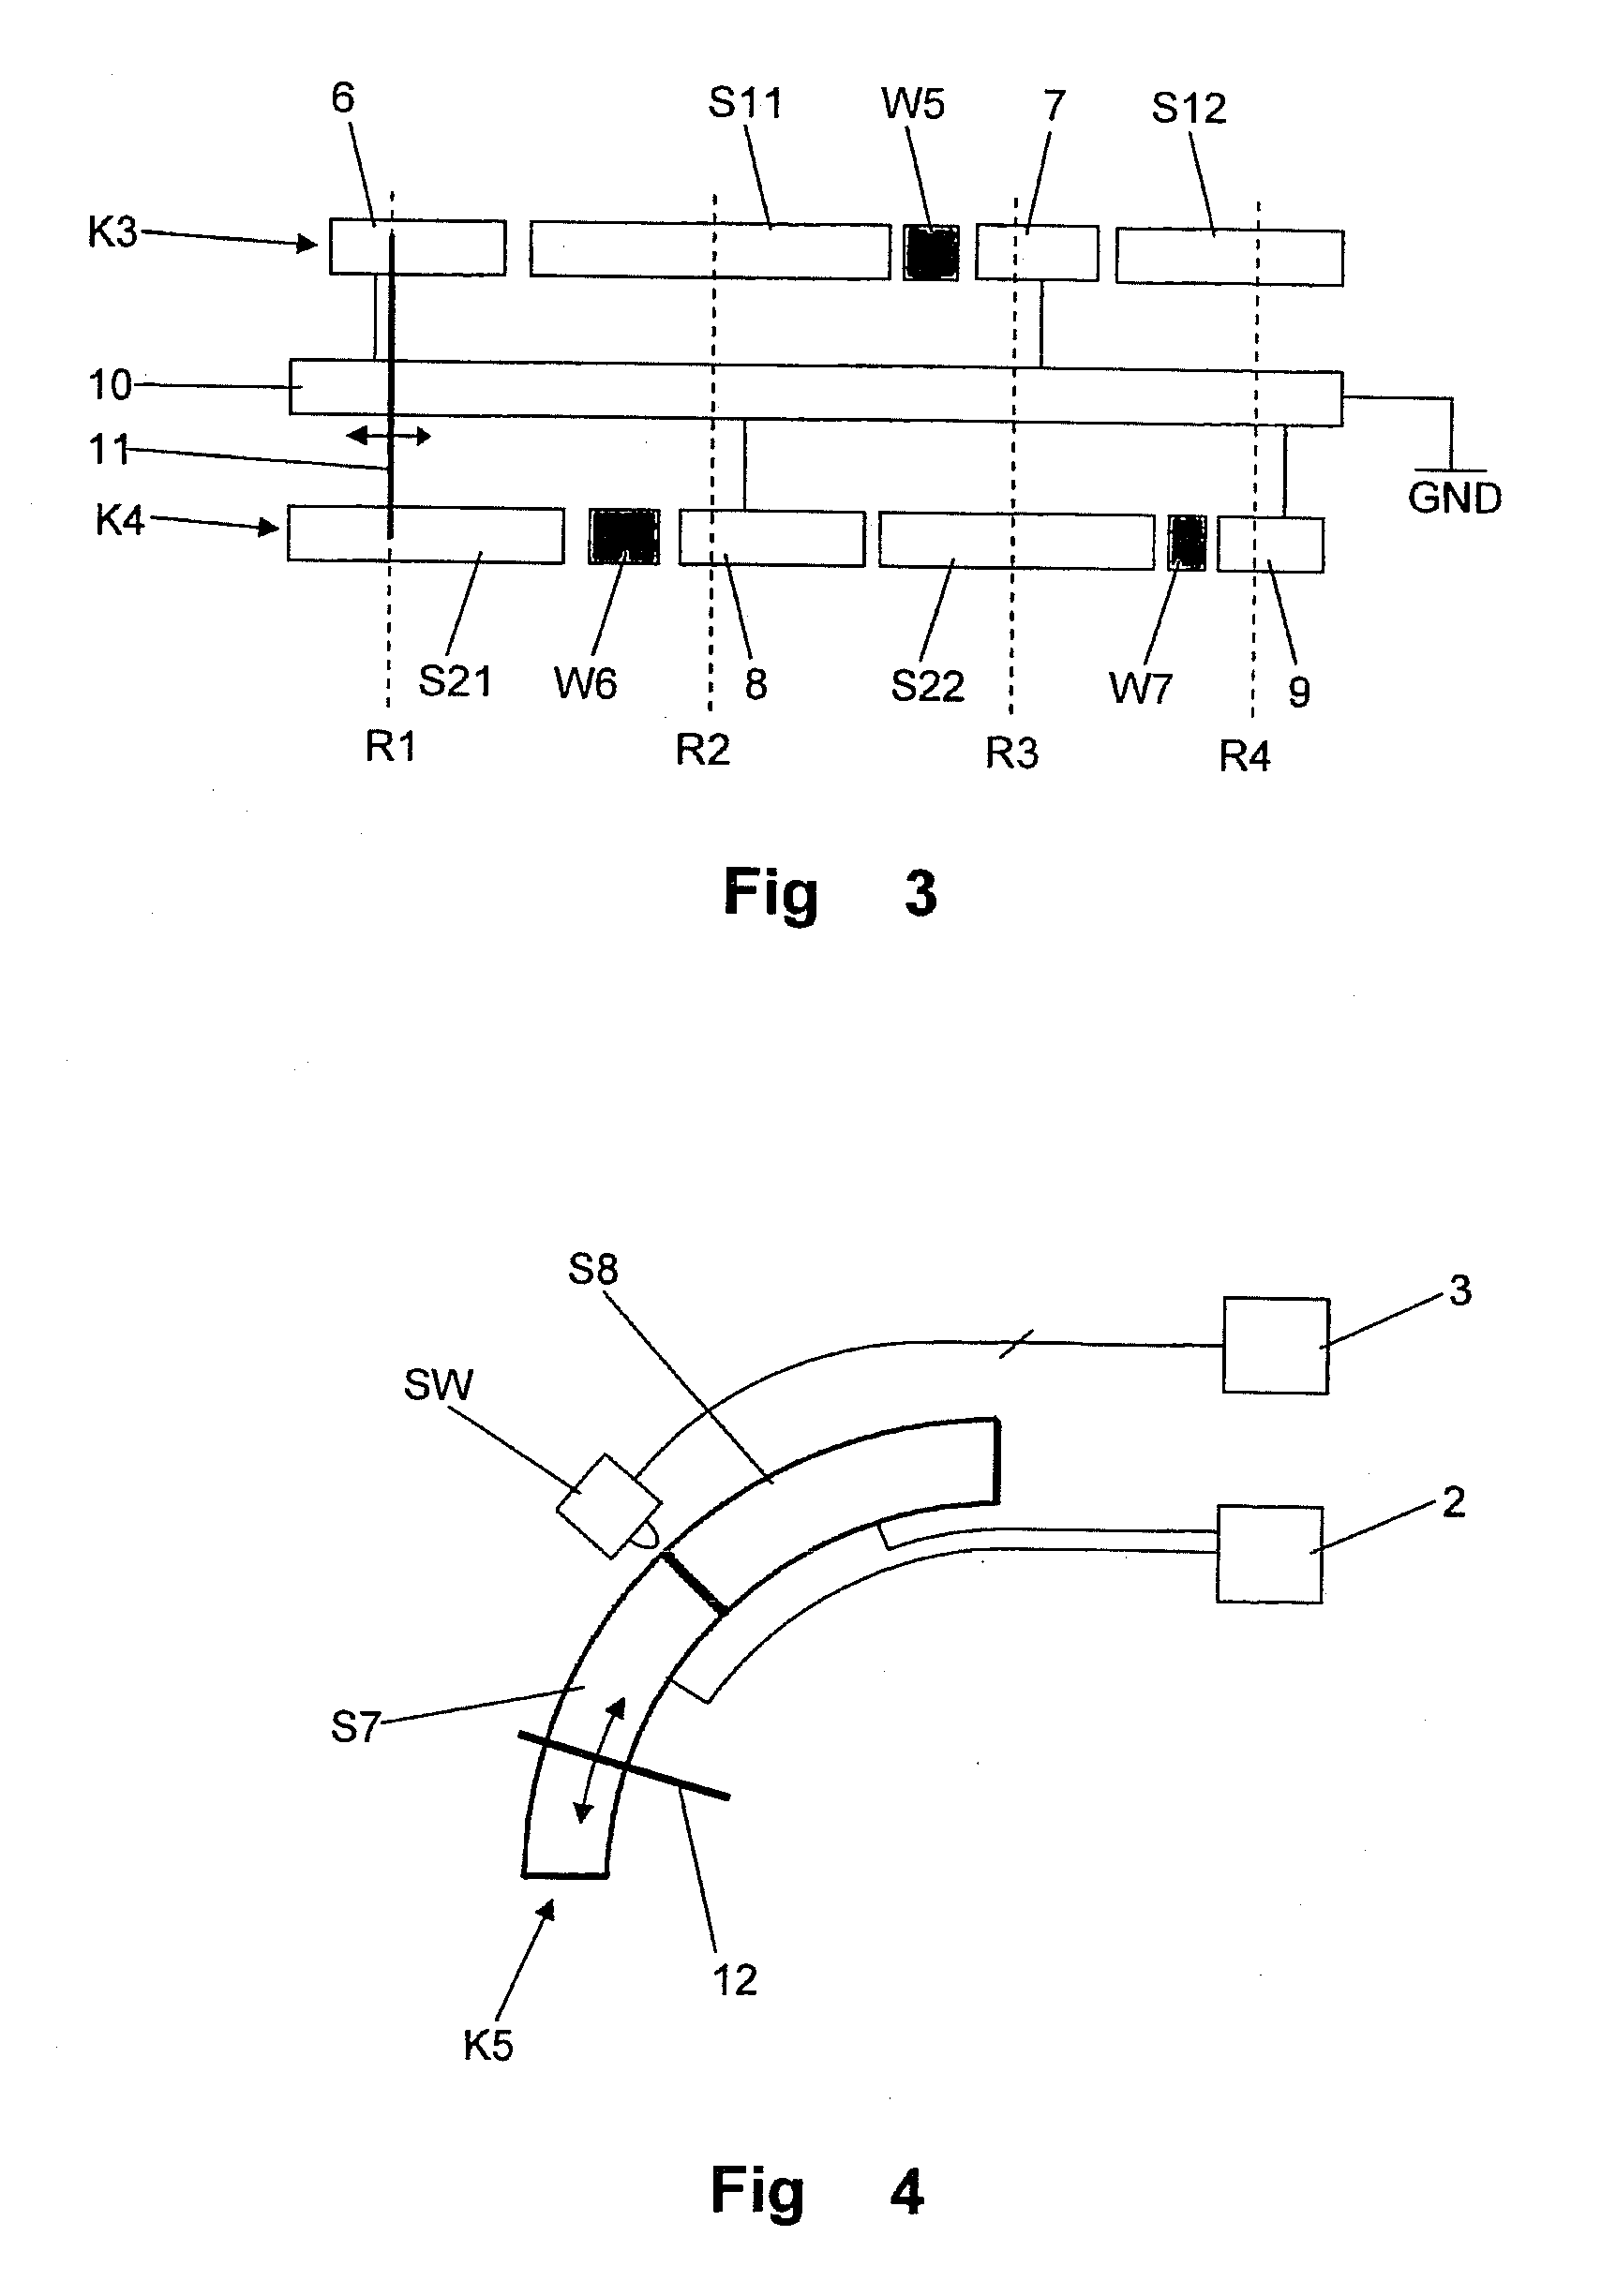 Operating element with wake-up functionality